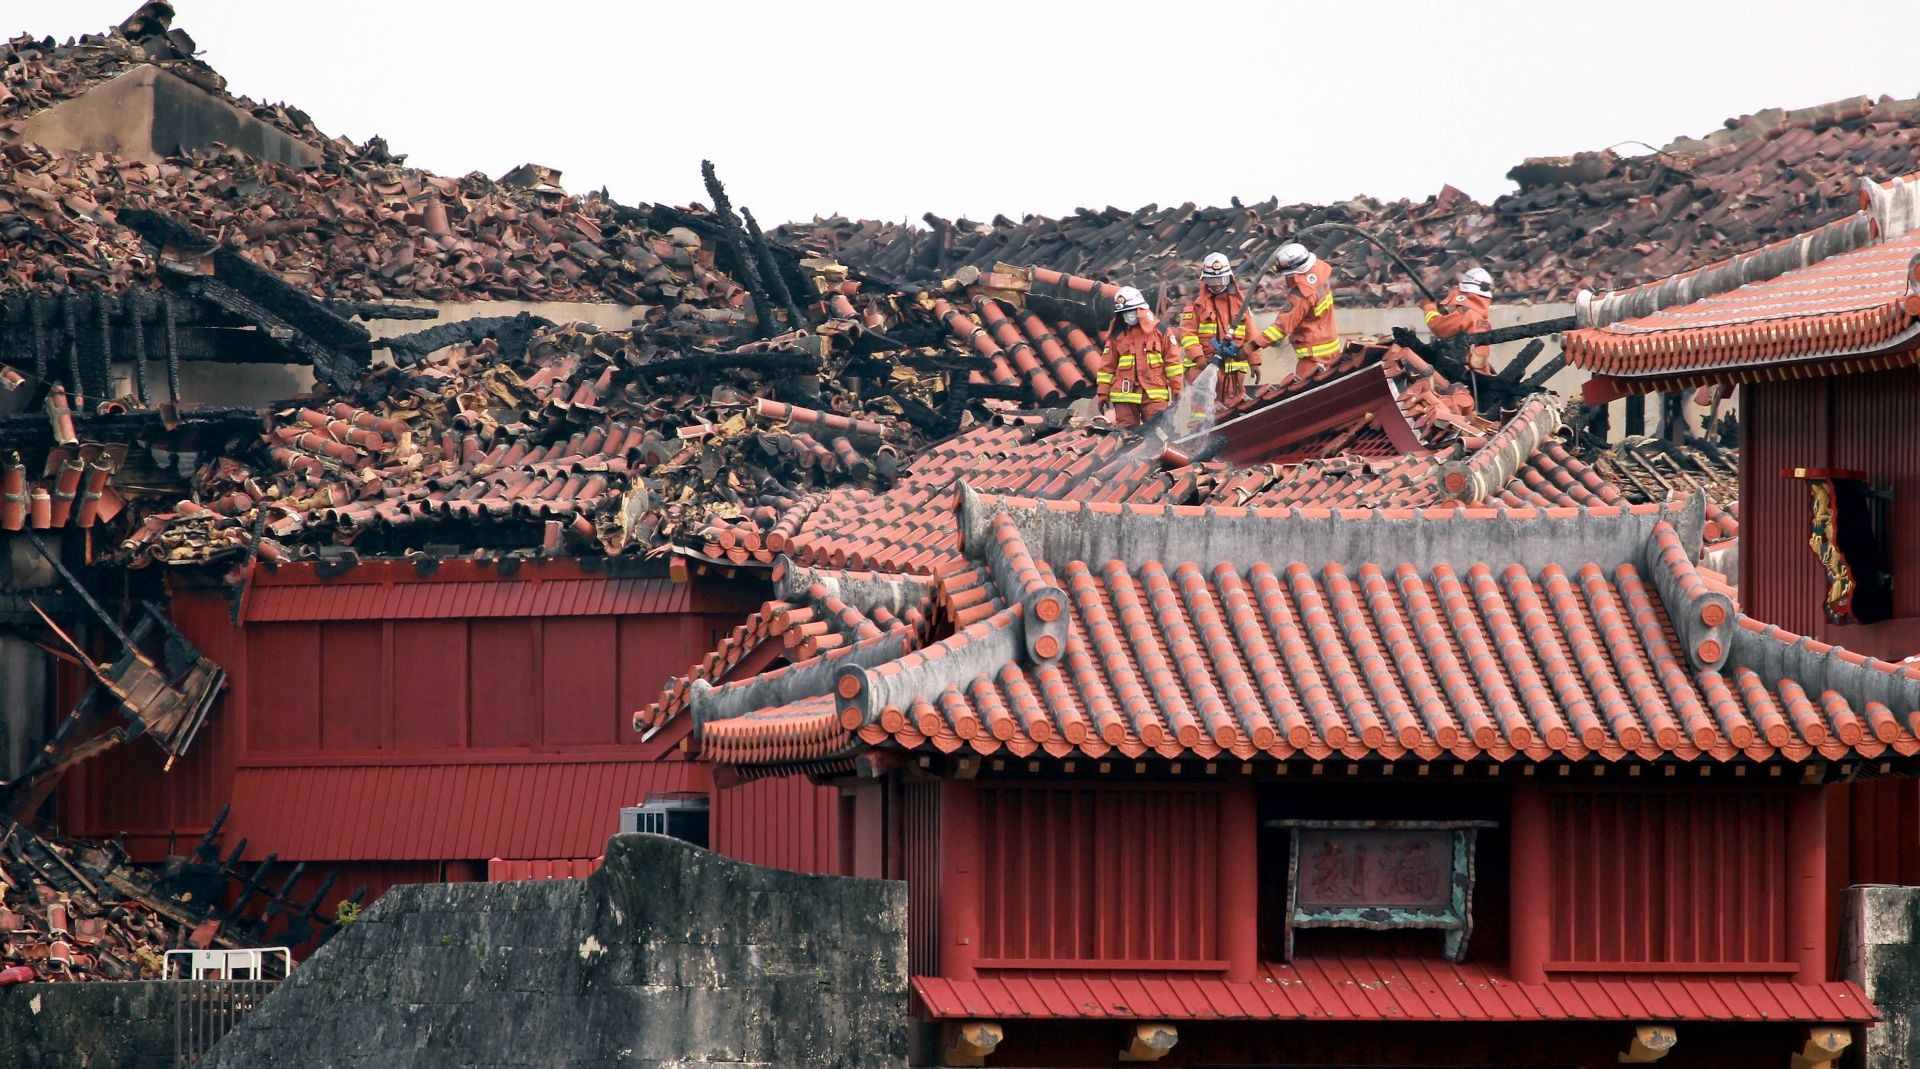 epa07961679 Firefighters inspect the heavily damaged Shuri Castle in Naha, Okinawa prefecture, Japan, 31 October 2019. On early 31 October, a fire started at Shuri Castle in Naha, a castle in Okinawa listed as a World Heritage site, destroying major buildings of the castle complex. The cause of the fire is still unknown and there is no report of injury.  EPA/HITOSHI MAESHIRO